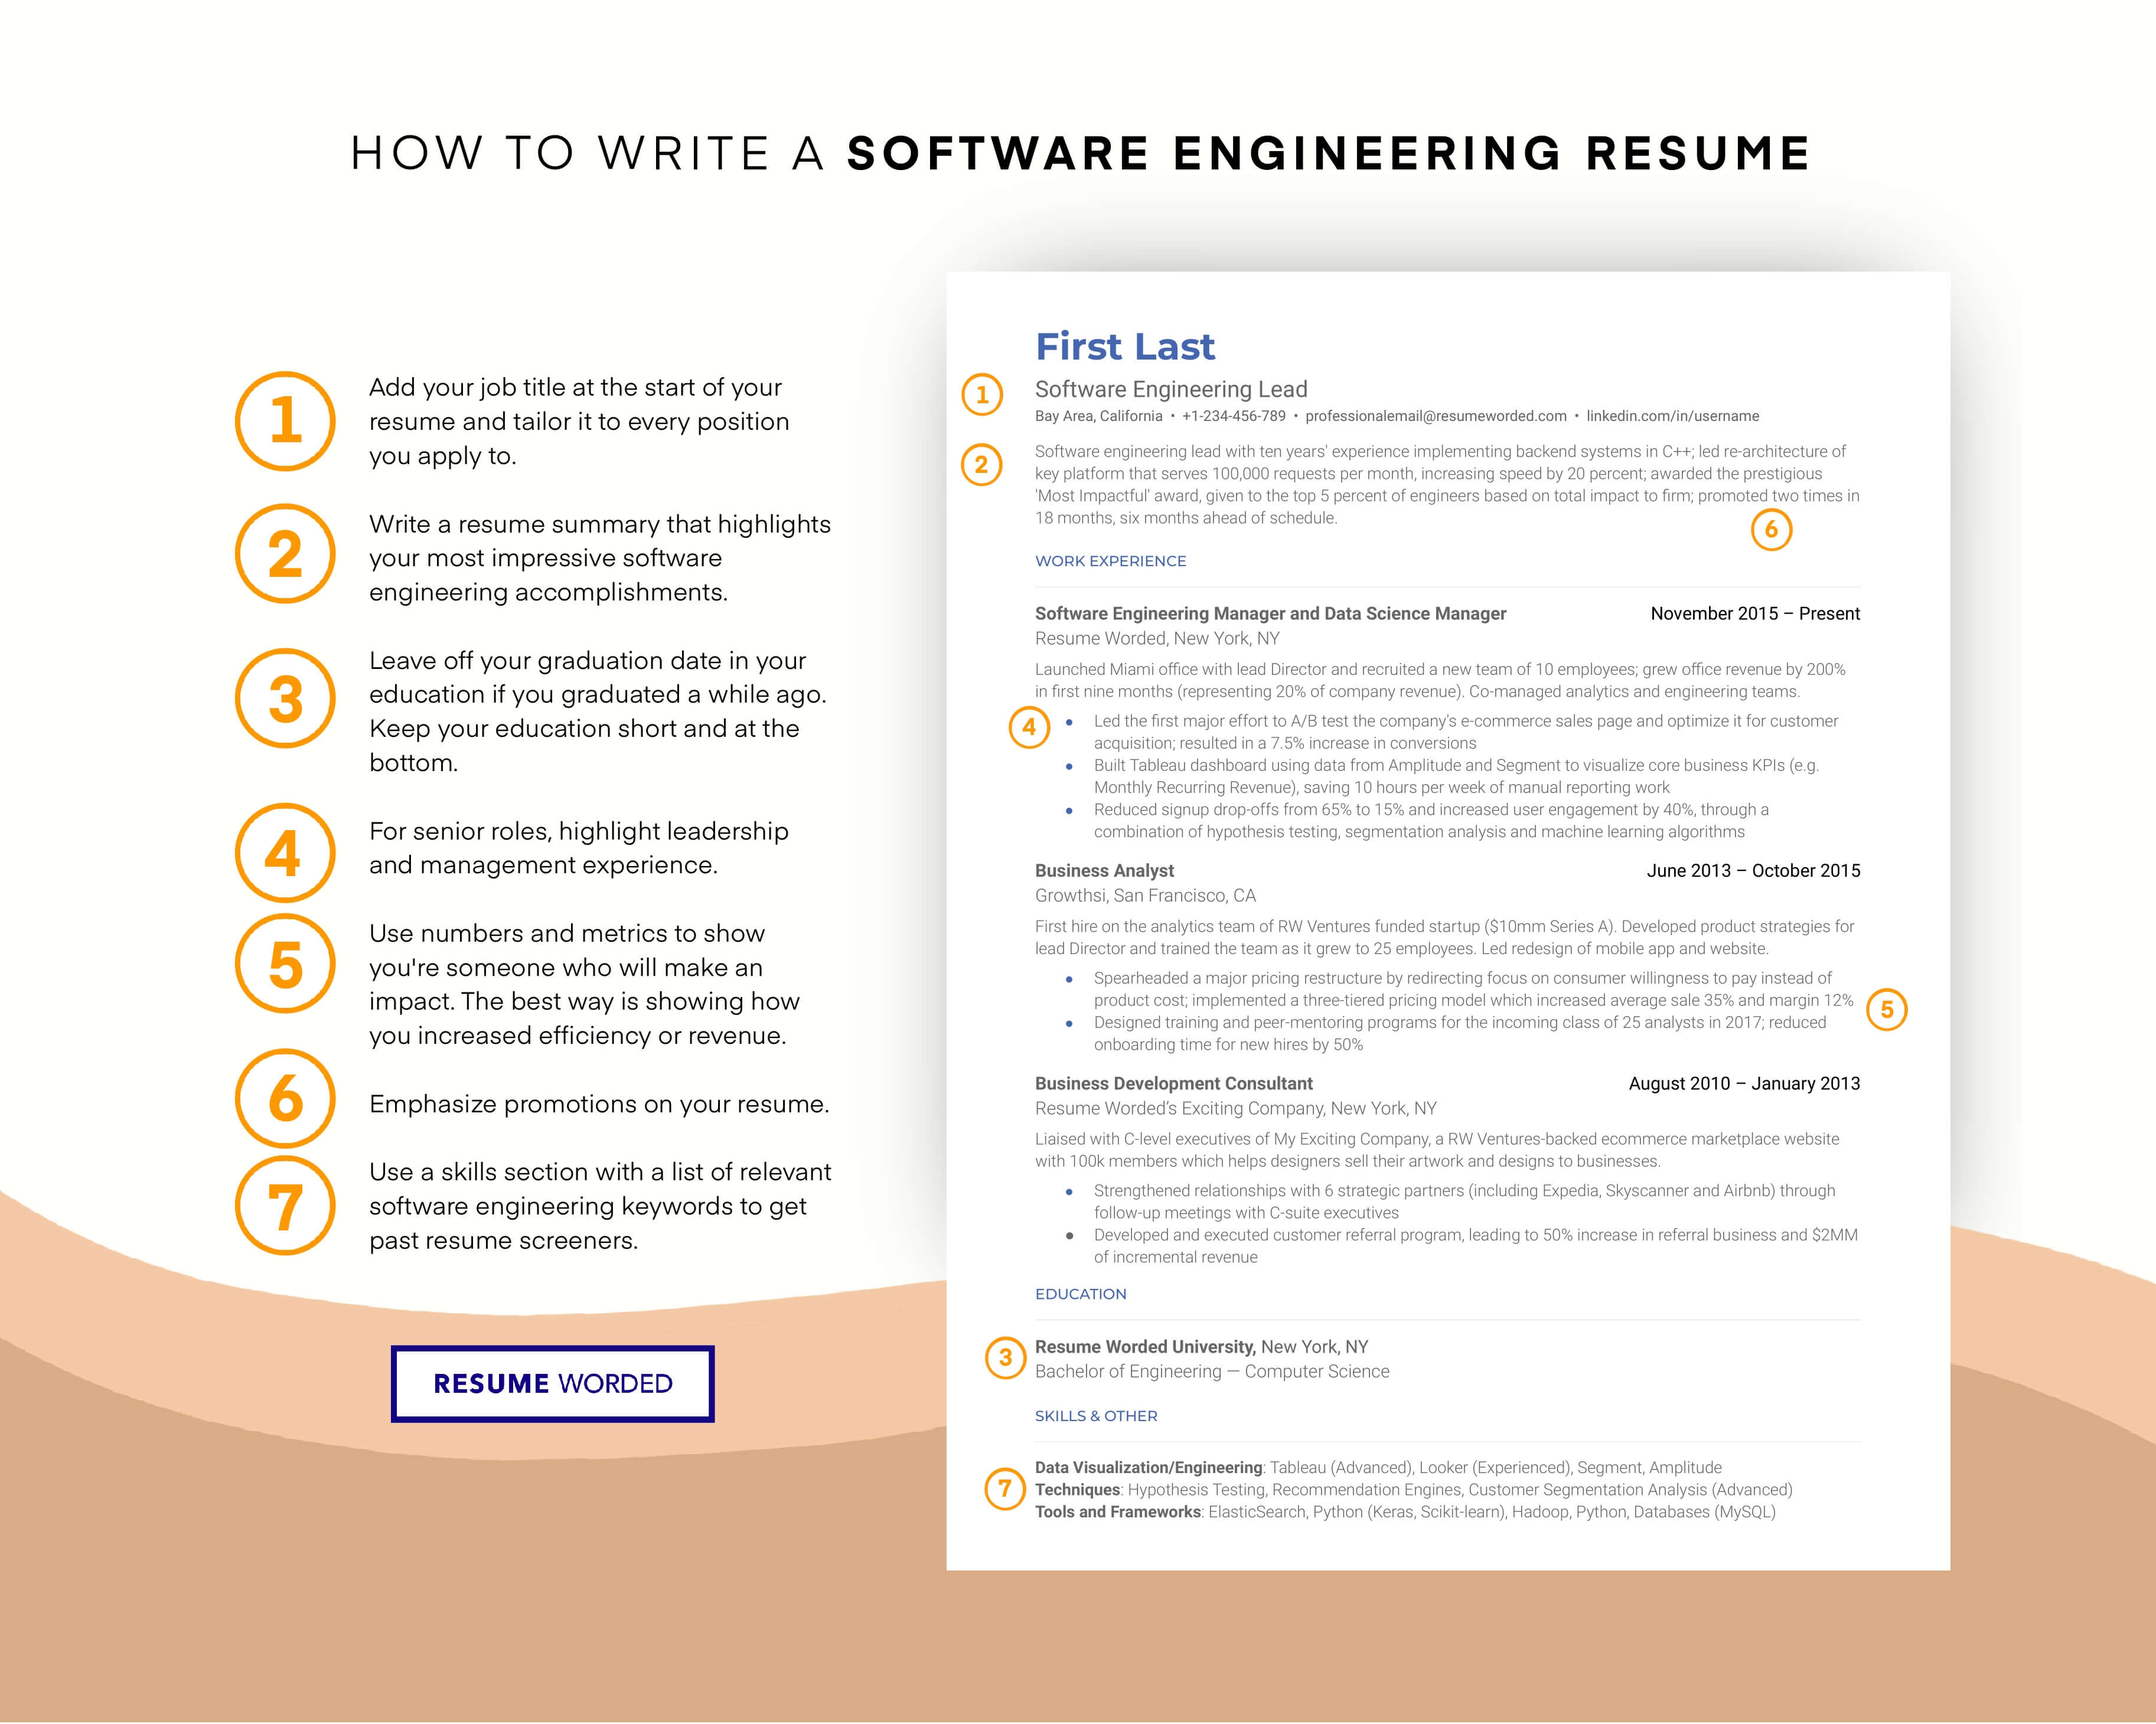 Participate in software-based competitions to highlight platform engineering experience - Platform Engineer  Resume